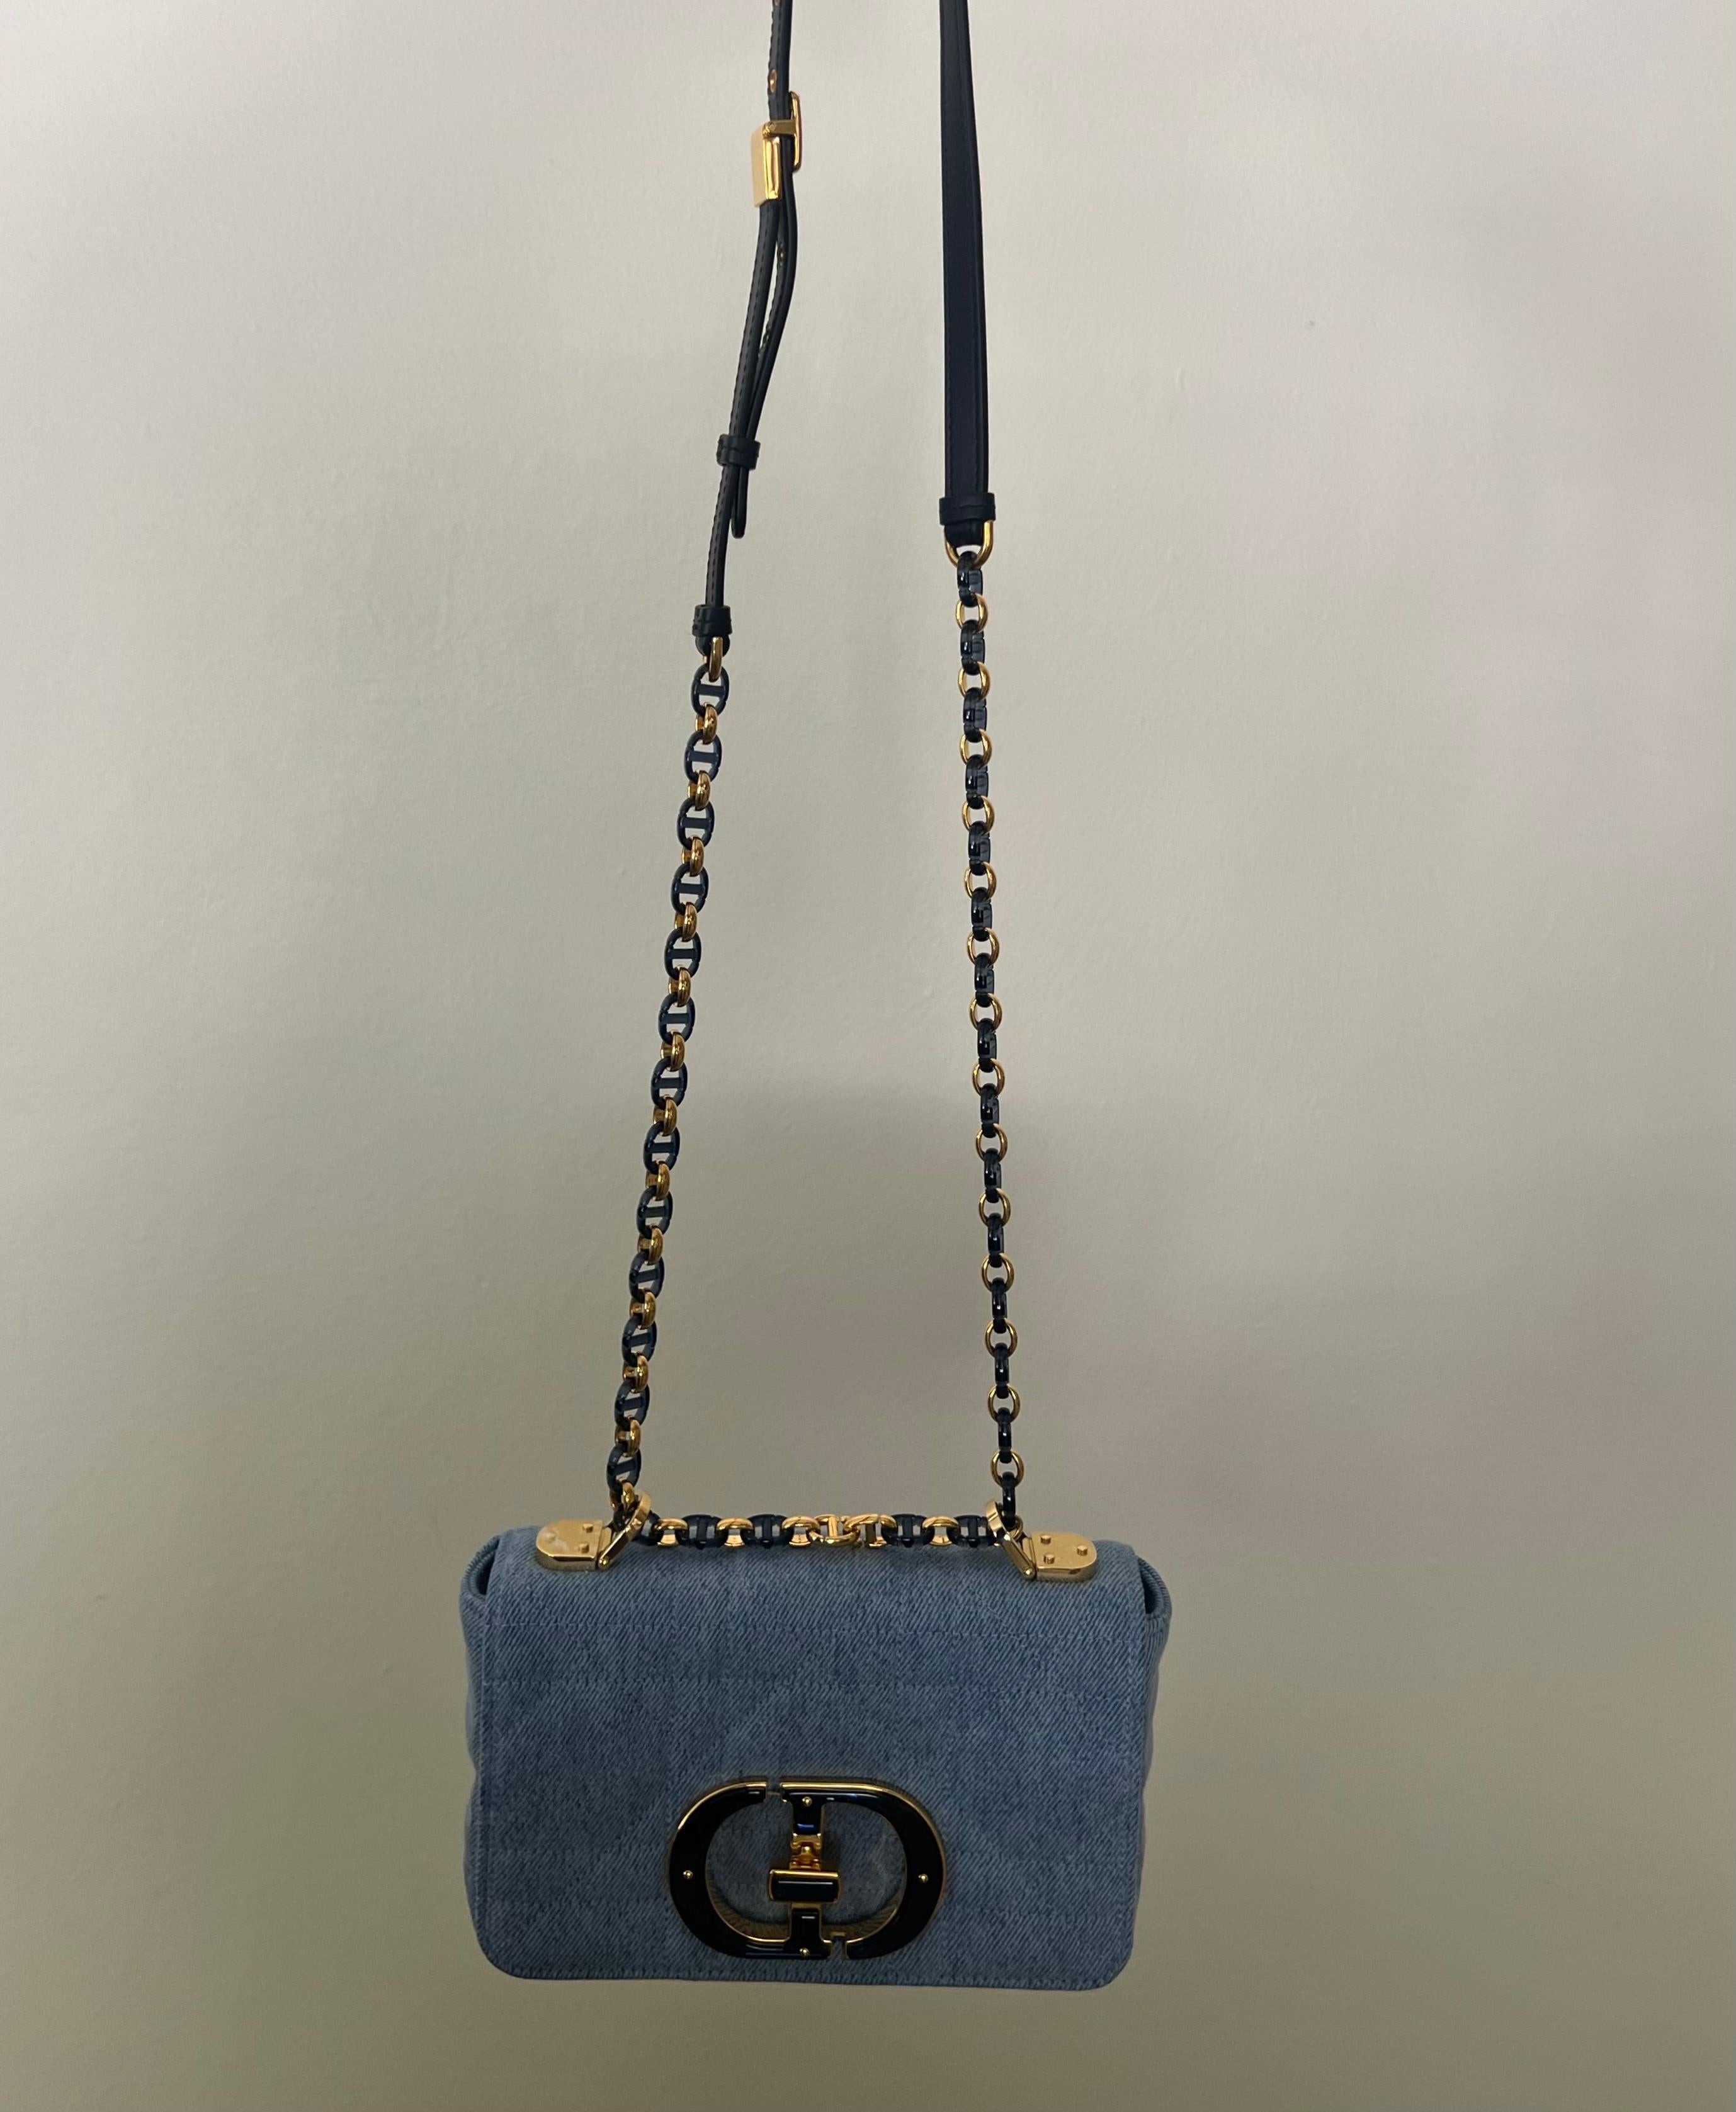 - Light blue quilted denim 
- Gold tone hardware
- Adjustable strap 
- Shoulder strap drops 21 inch
- Includes dust bag and authentication card
- Made in Italy